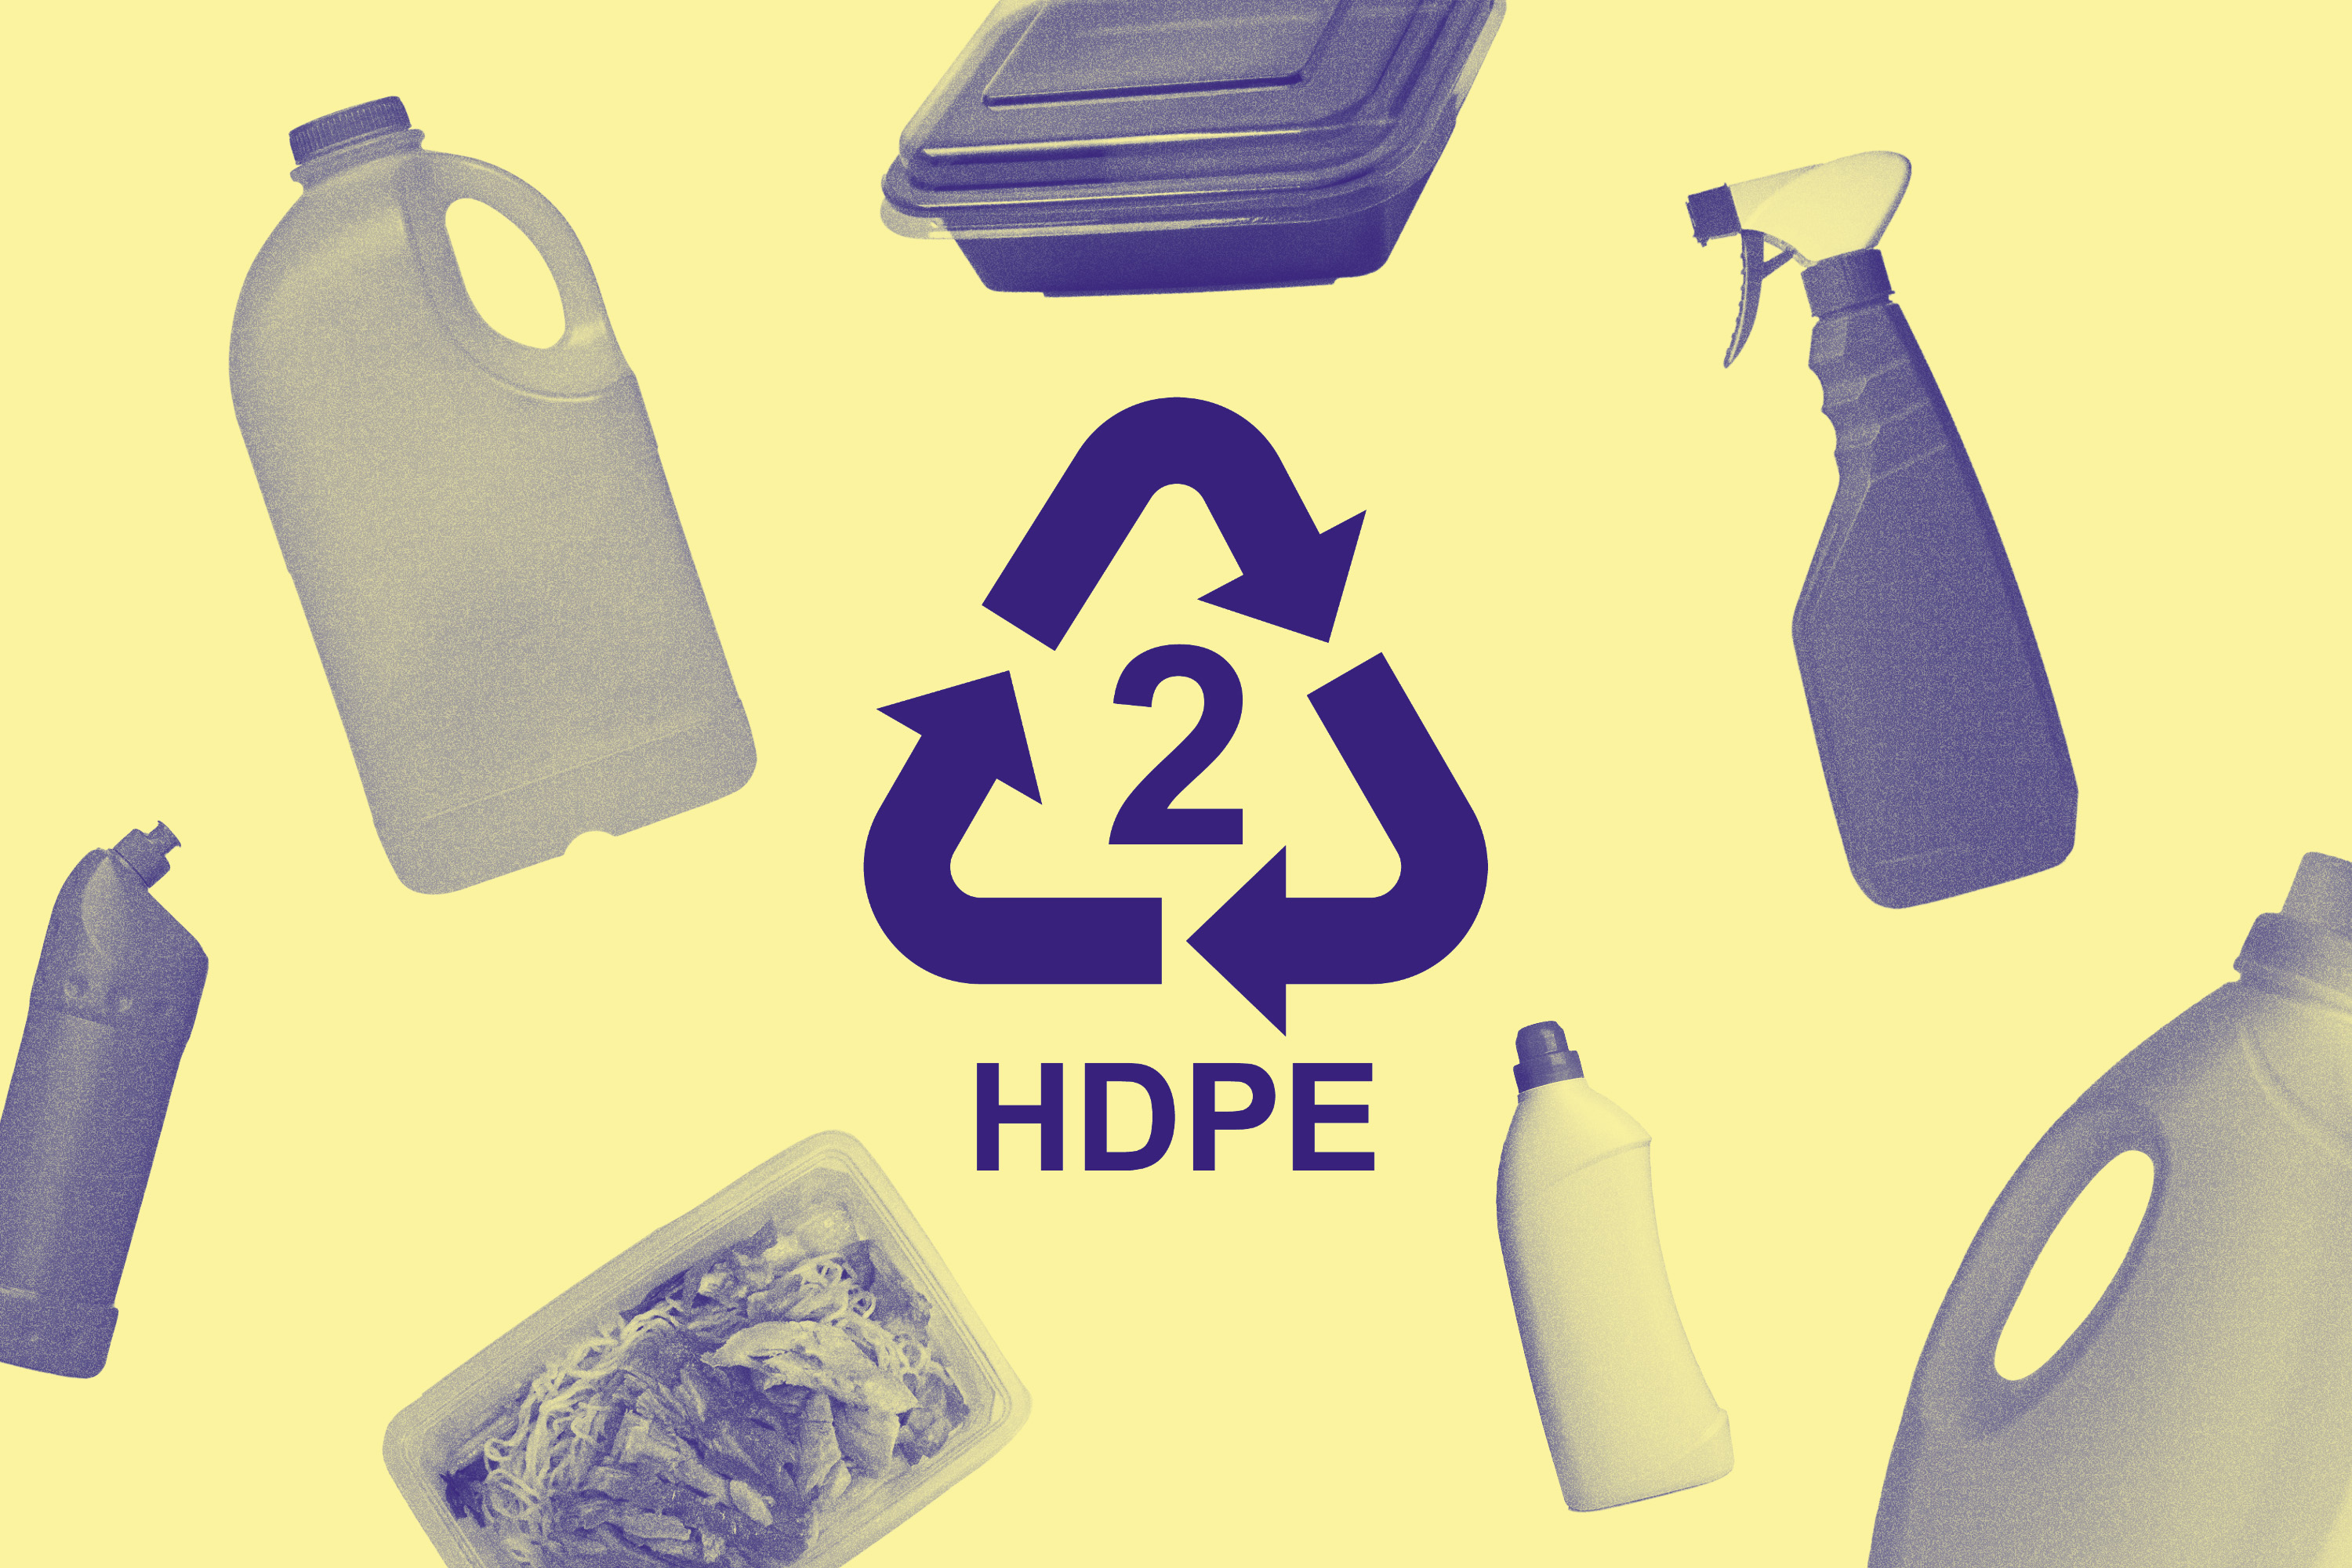 A graphic of some HDPE products.